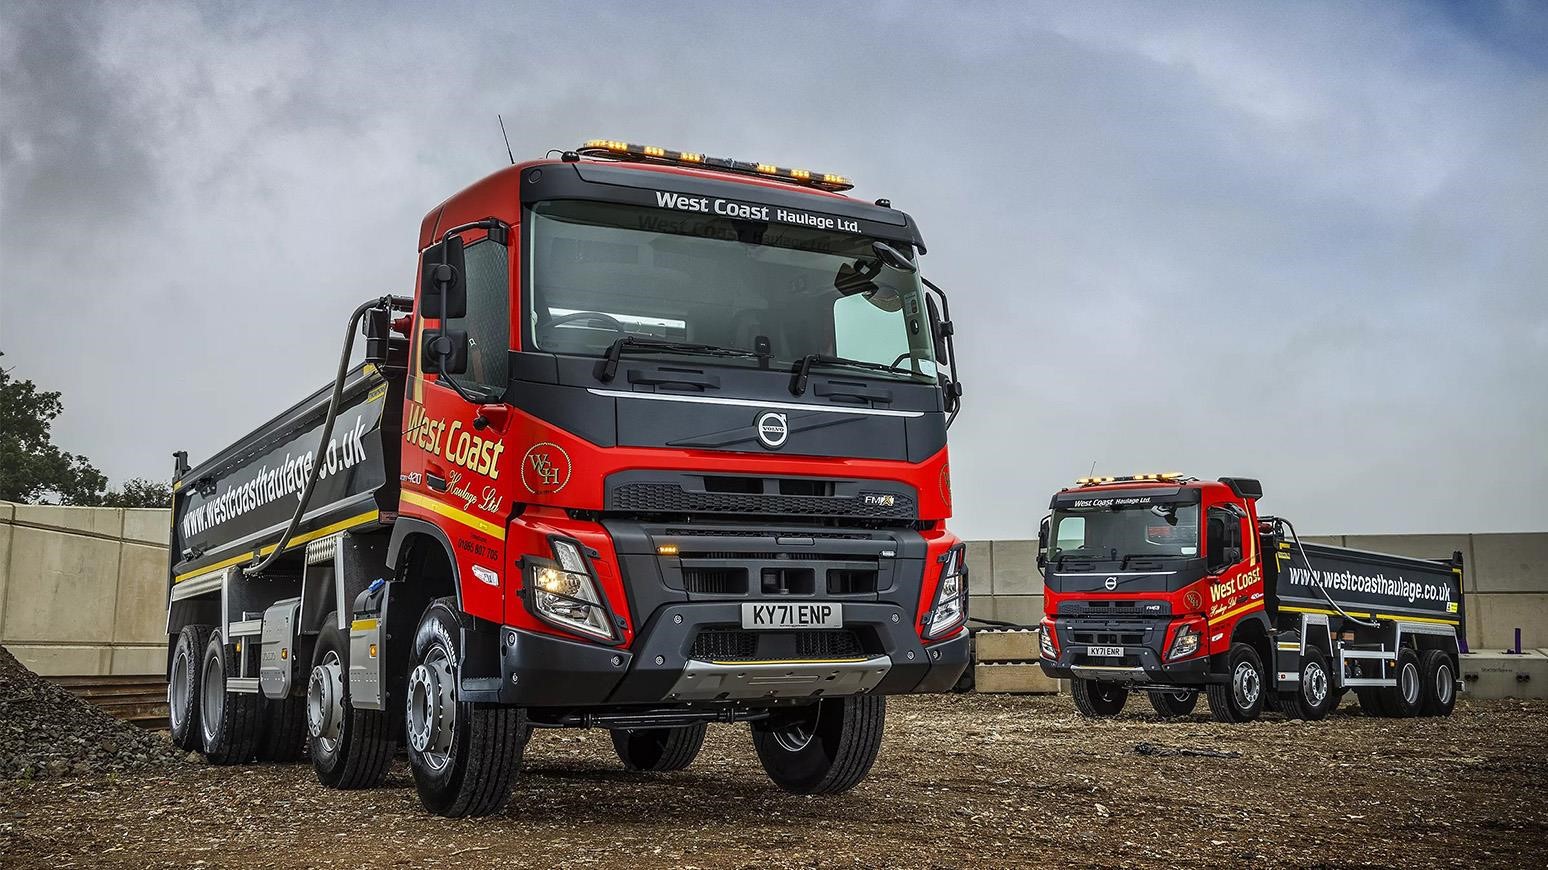 West Coast Haulage Replaces 60 Trucks From Another Marque With New Volvo FMX Tippers